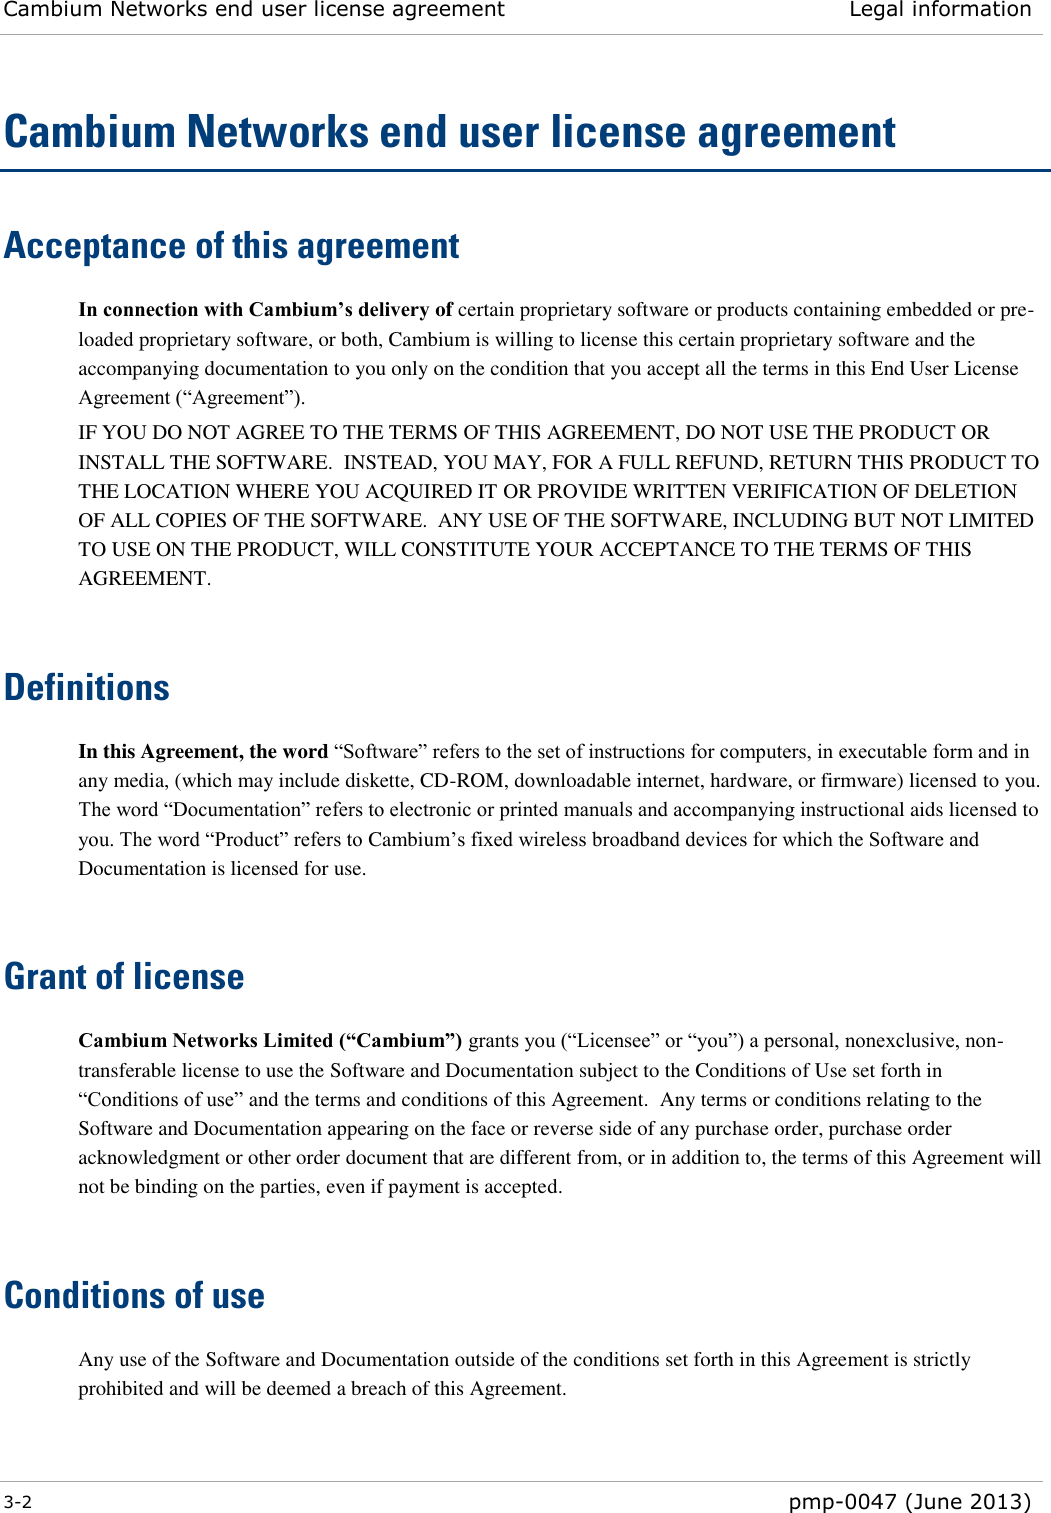 Cambium Networks end user license agreement Legal information  3-2  pmp-0047 (June 2013)  Cambium Networks end user license agreement Acceptance of this agreement In connection with Cambium’s delivery of certain proprietary software or products containing embedded or pre-loaded proprietary software, or both, Cambium is willing to license this certain proprietary software and the accompanying documentation to you only on the condition that you accept all the terms in this End User License Agreement (“Agreement”). IF YOU DO NOT AGREE TO THE TERMS OF THIS AGREEMENT, DO NOT USE THE PRODUCT OR INSTALL THE SOFTWARE.  INSTEAD, YOU MAY, FOR A FULL REFUND, RETURN THIS PRODUCT TO THE LOCATION WHERE YOU ACQUIRED IT OR PROVIDE WRITTEN VERIFICATION OF DELETION OF ALL COPIES OF THE SOFTWARE.  ANY USE OF THE SOFTWARE, INCLUDING BUT NOT LIMITED TO USE ON THE PRODUCT, WILL CONSTITUTE YOUR ACCEPTANCE TO THE TERMS OF THIS AGREEMENT.   Definitions In this Agreement, the word “Software” refers to the set of instructions for computers, in executable form and in any media, (which may include diskette, CD-ROM, downloadable internet, hardware, or firmware) licensed to you.  The word “Documentation” refers to electronic or printed manuals and accompanying instructional aids licensed to you. The word “Product” refers to Cambium’s fixed wireless broadband devices for which the Software and Documentation is licensed for use.   Grant of license Cambium Networks Limited (“Cambium”) grants you (“Licensee” or “you”) a personal, nonexclusive, non-transferable license to use the Software and Documentation subject to the Conditions of Use set forth in “Conditions of use” and the terms and conditions of this Agreement.  Any terms or conditions relating to the Software and Documentation appearing on the face or reverse side of any purchase order, purchase order acknowledgment or other order document that are different from, or in addition to, the terms of this Agreement will not be binding on the parties, even if payment is accepted.   Conditions of use Any use of the Software and Documentation outside of the conditions set forth in this Agreement is strictly prohibited and will be deemed a breach of this Agreement.  